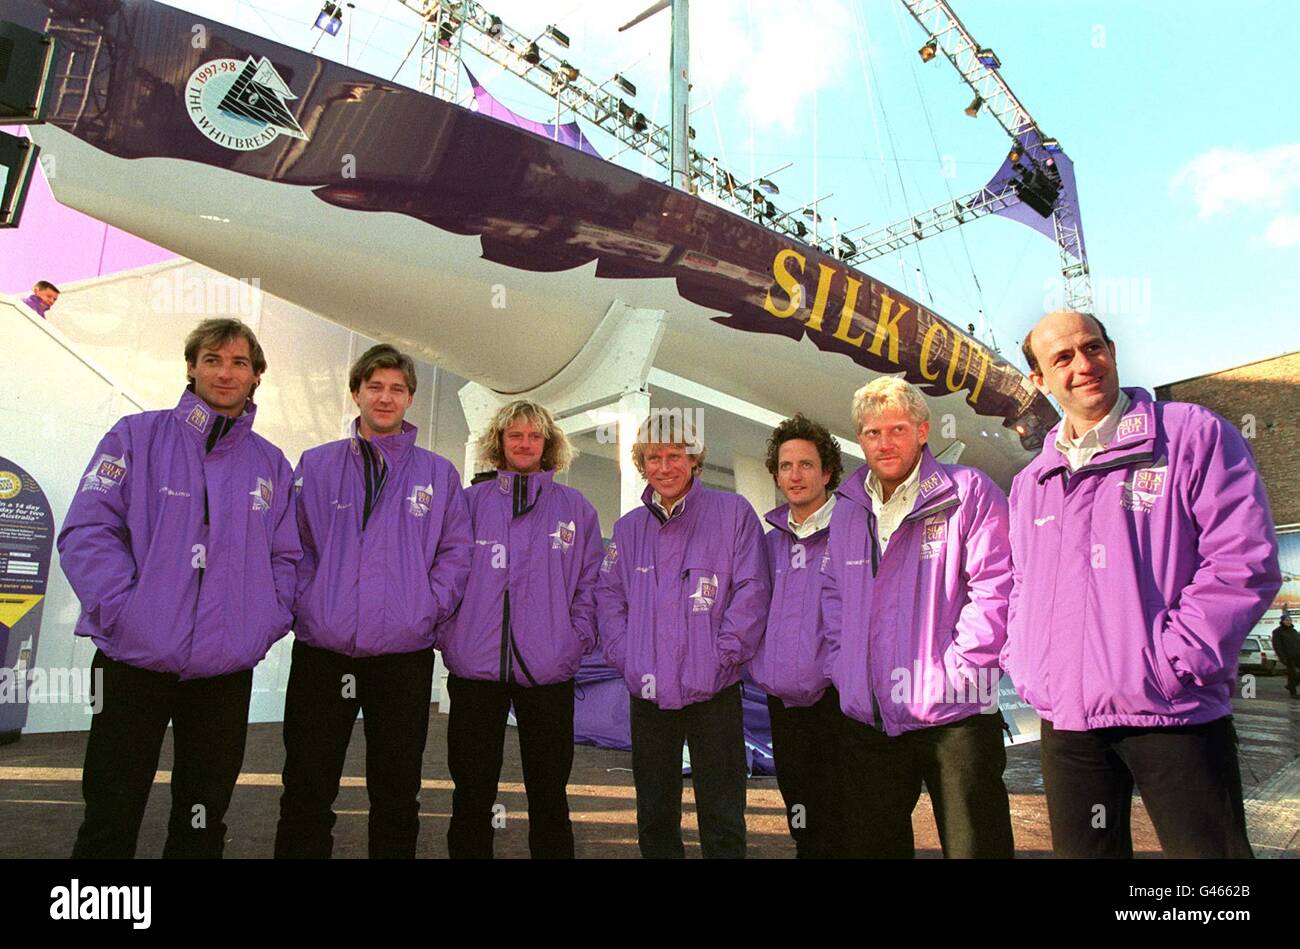 The seven members of the Silk Cut crew at the London Boat Show today (Thursday) with the yacht they hope to win the Whitbread Round the World race in. (L-R) Gordon Maguire, Steve Hayles, Neal McDonald, Lawrie Smith, Adrian Stead, Jason Carrington and Russell Pickthall. Photo by Tony Harris/PA. Stock Photo